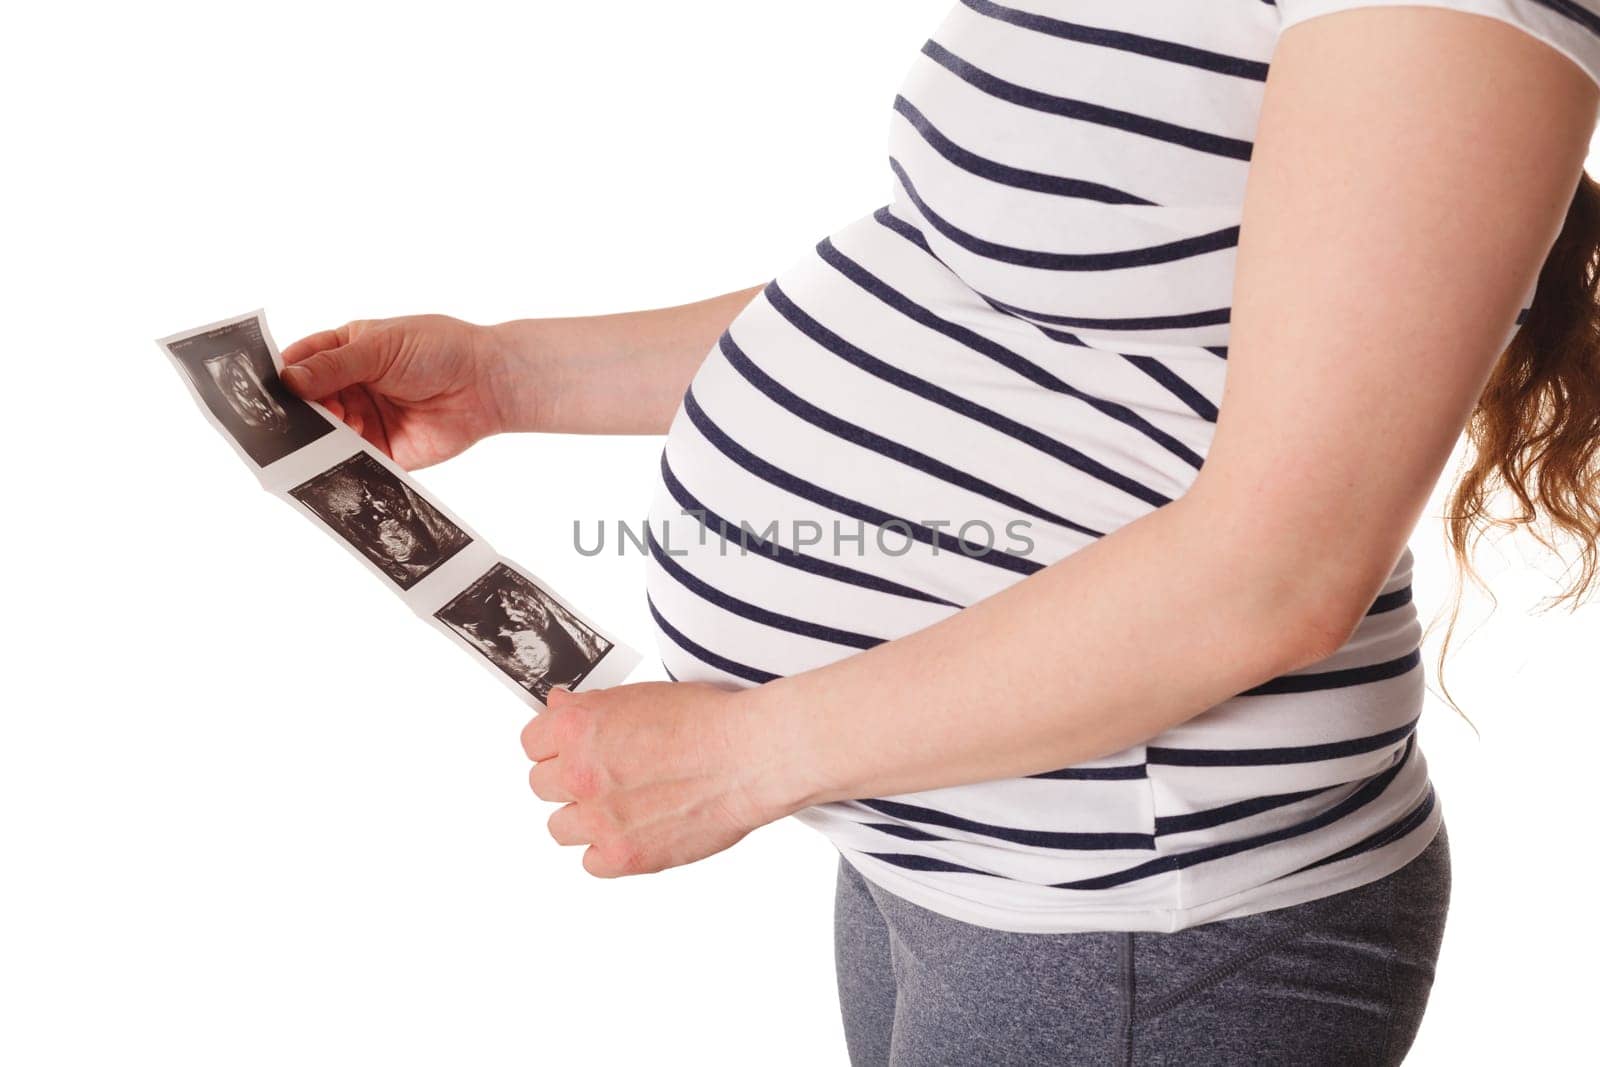 Pregnant woman standing and holding her ultrasound baby scan by dimol